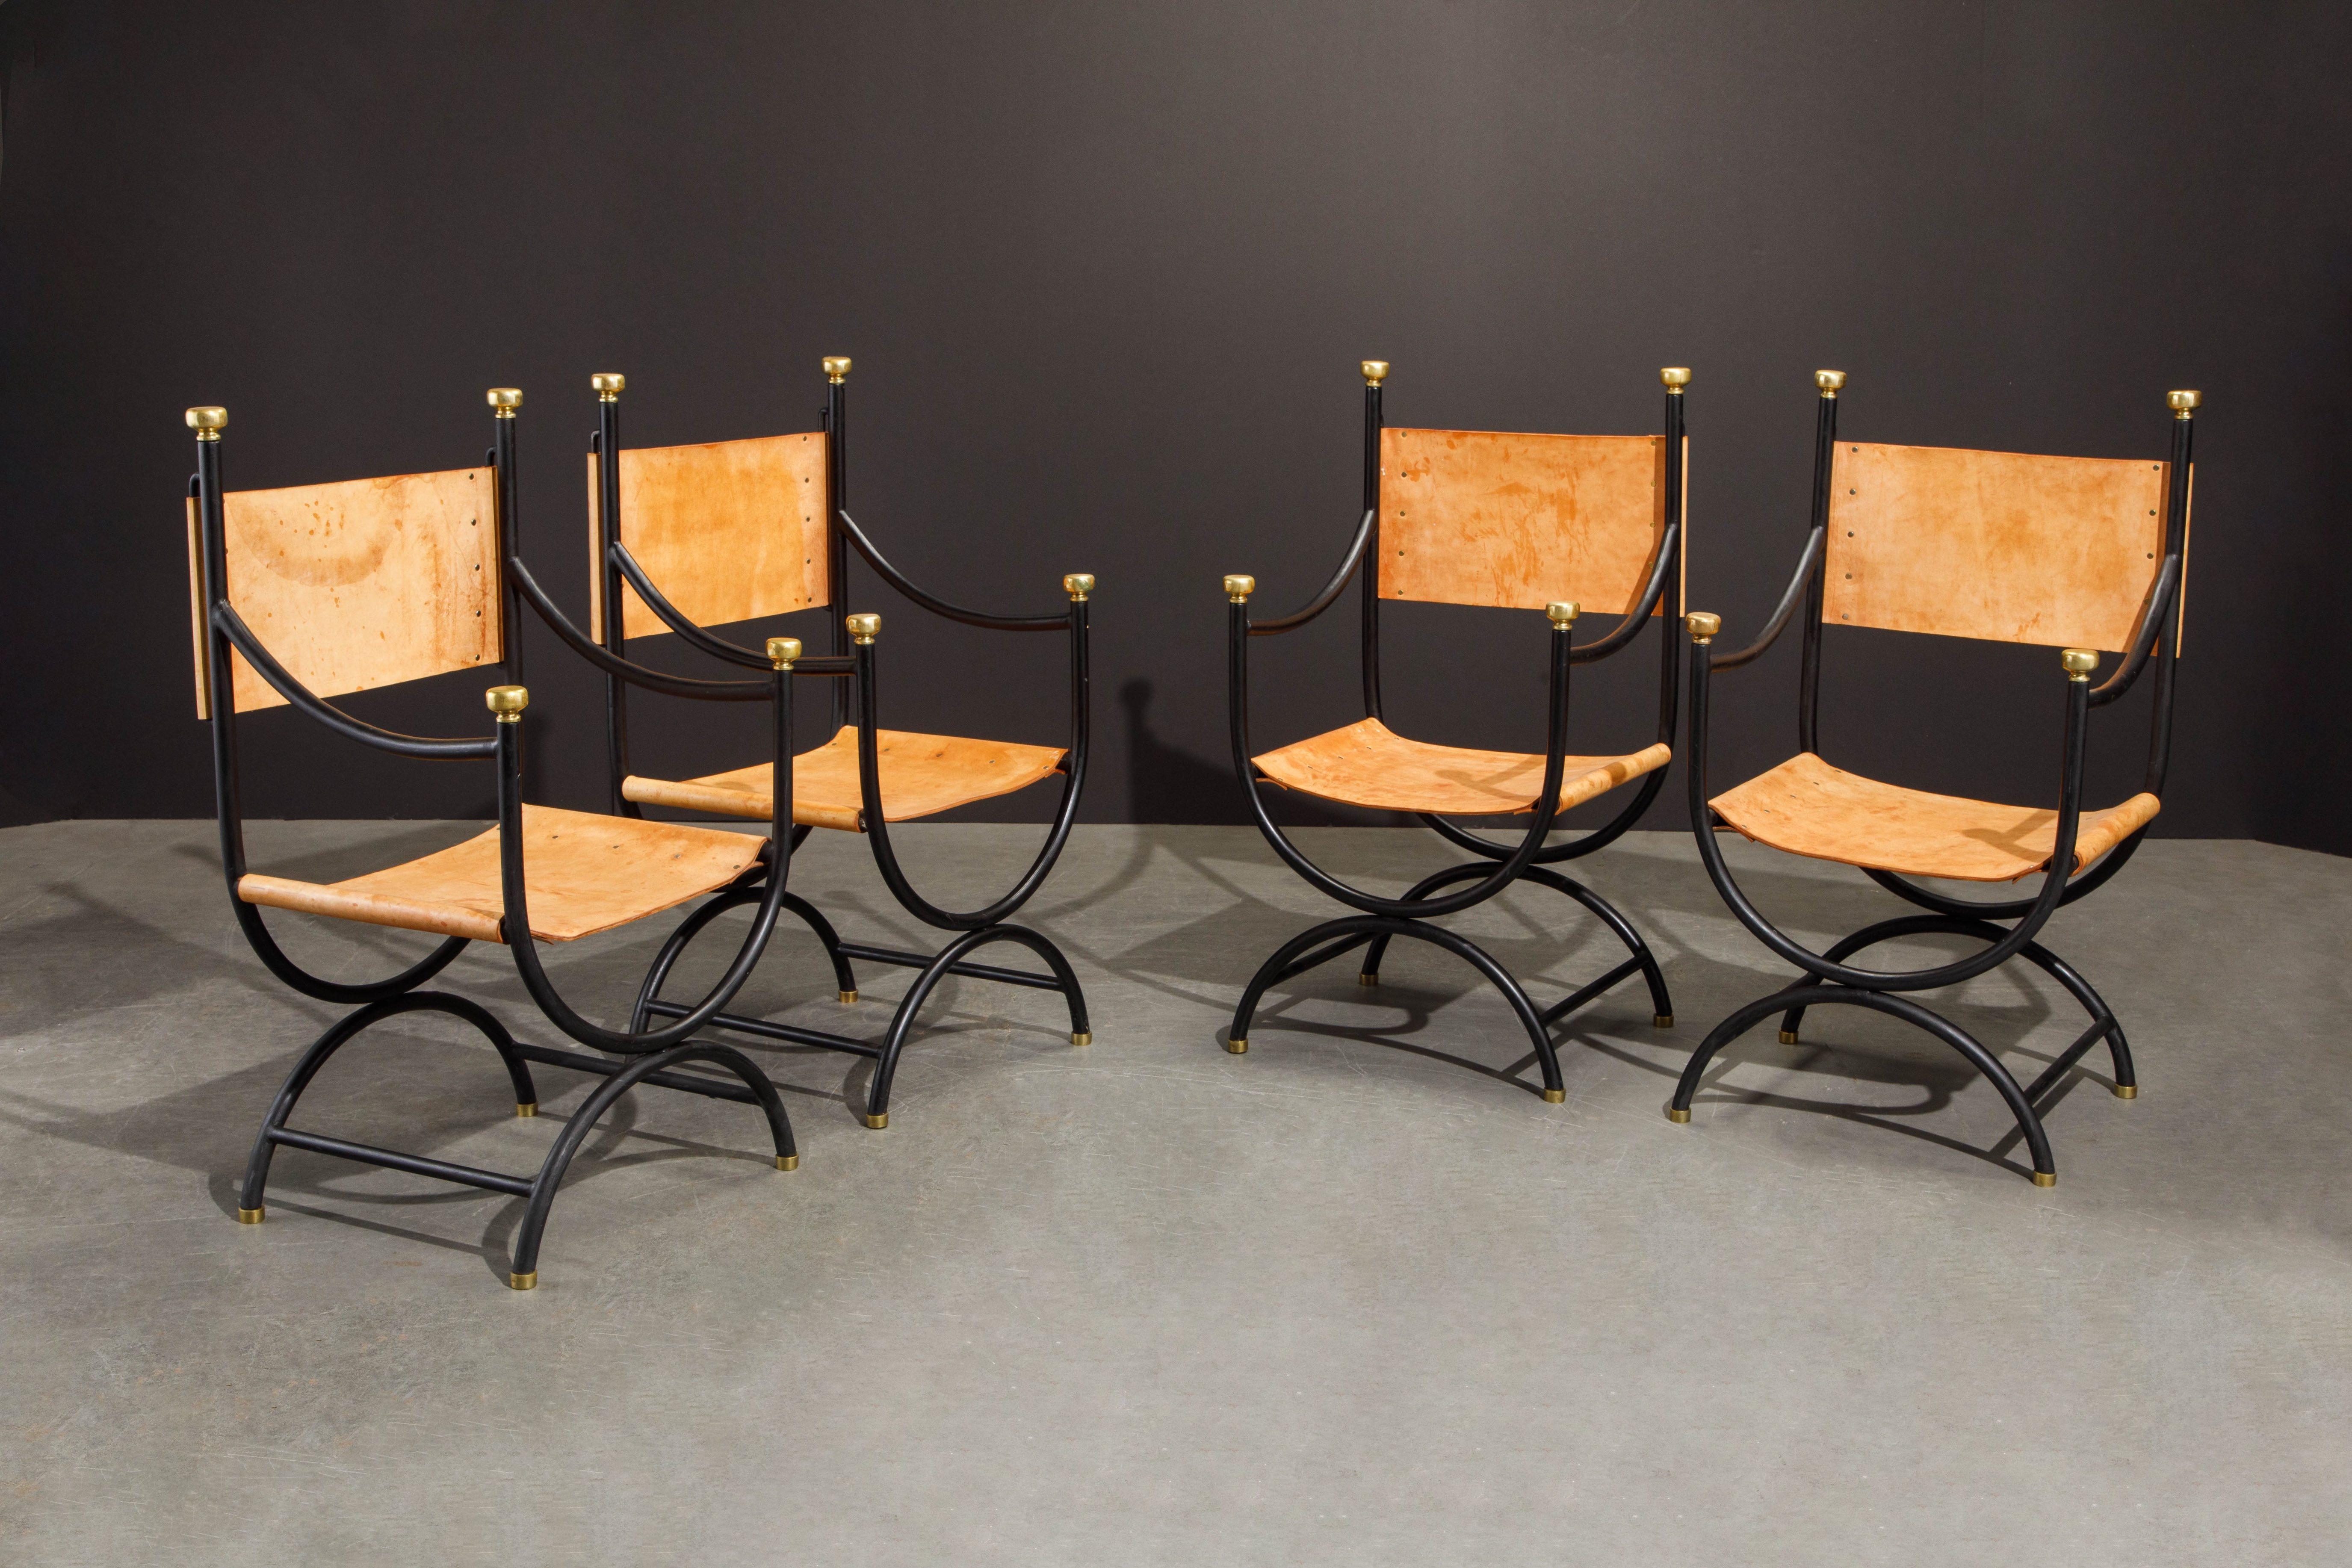 This incredibly high-quality, sizable and hefty set of four (4) modern Savonarola directors chairs features thick natural leather hides with brass rivets, tubular black iron frames finished with very-high-quality heavy brass finials and feet. You